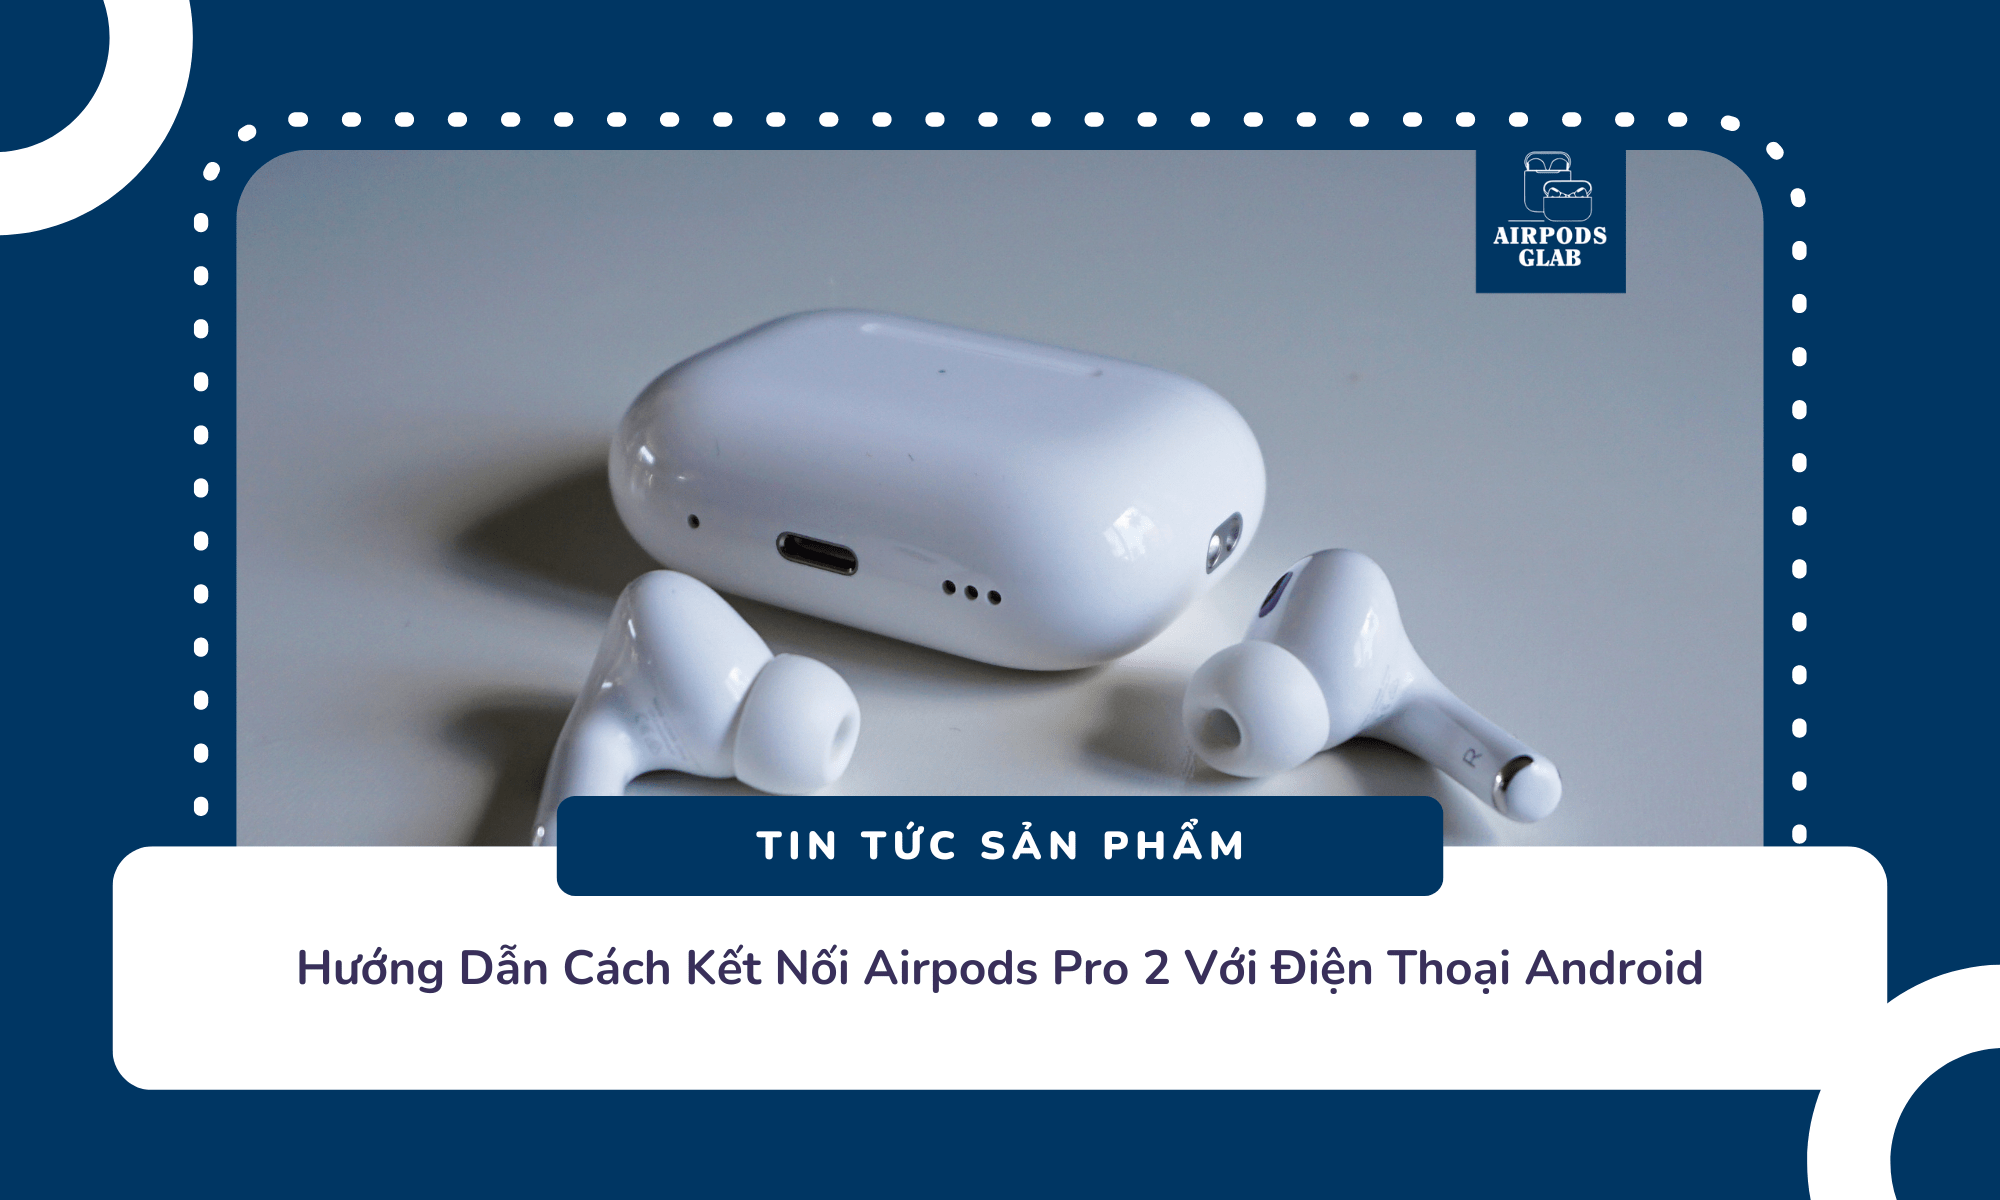 airpods-pro-2-ket-noi-android 